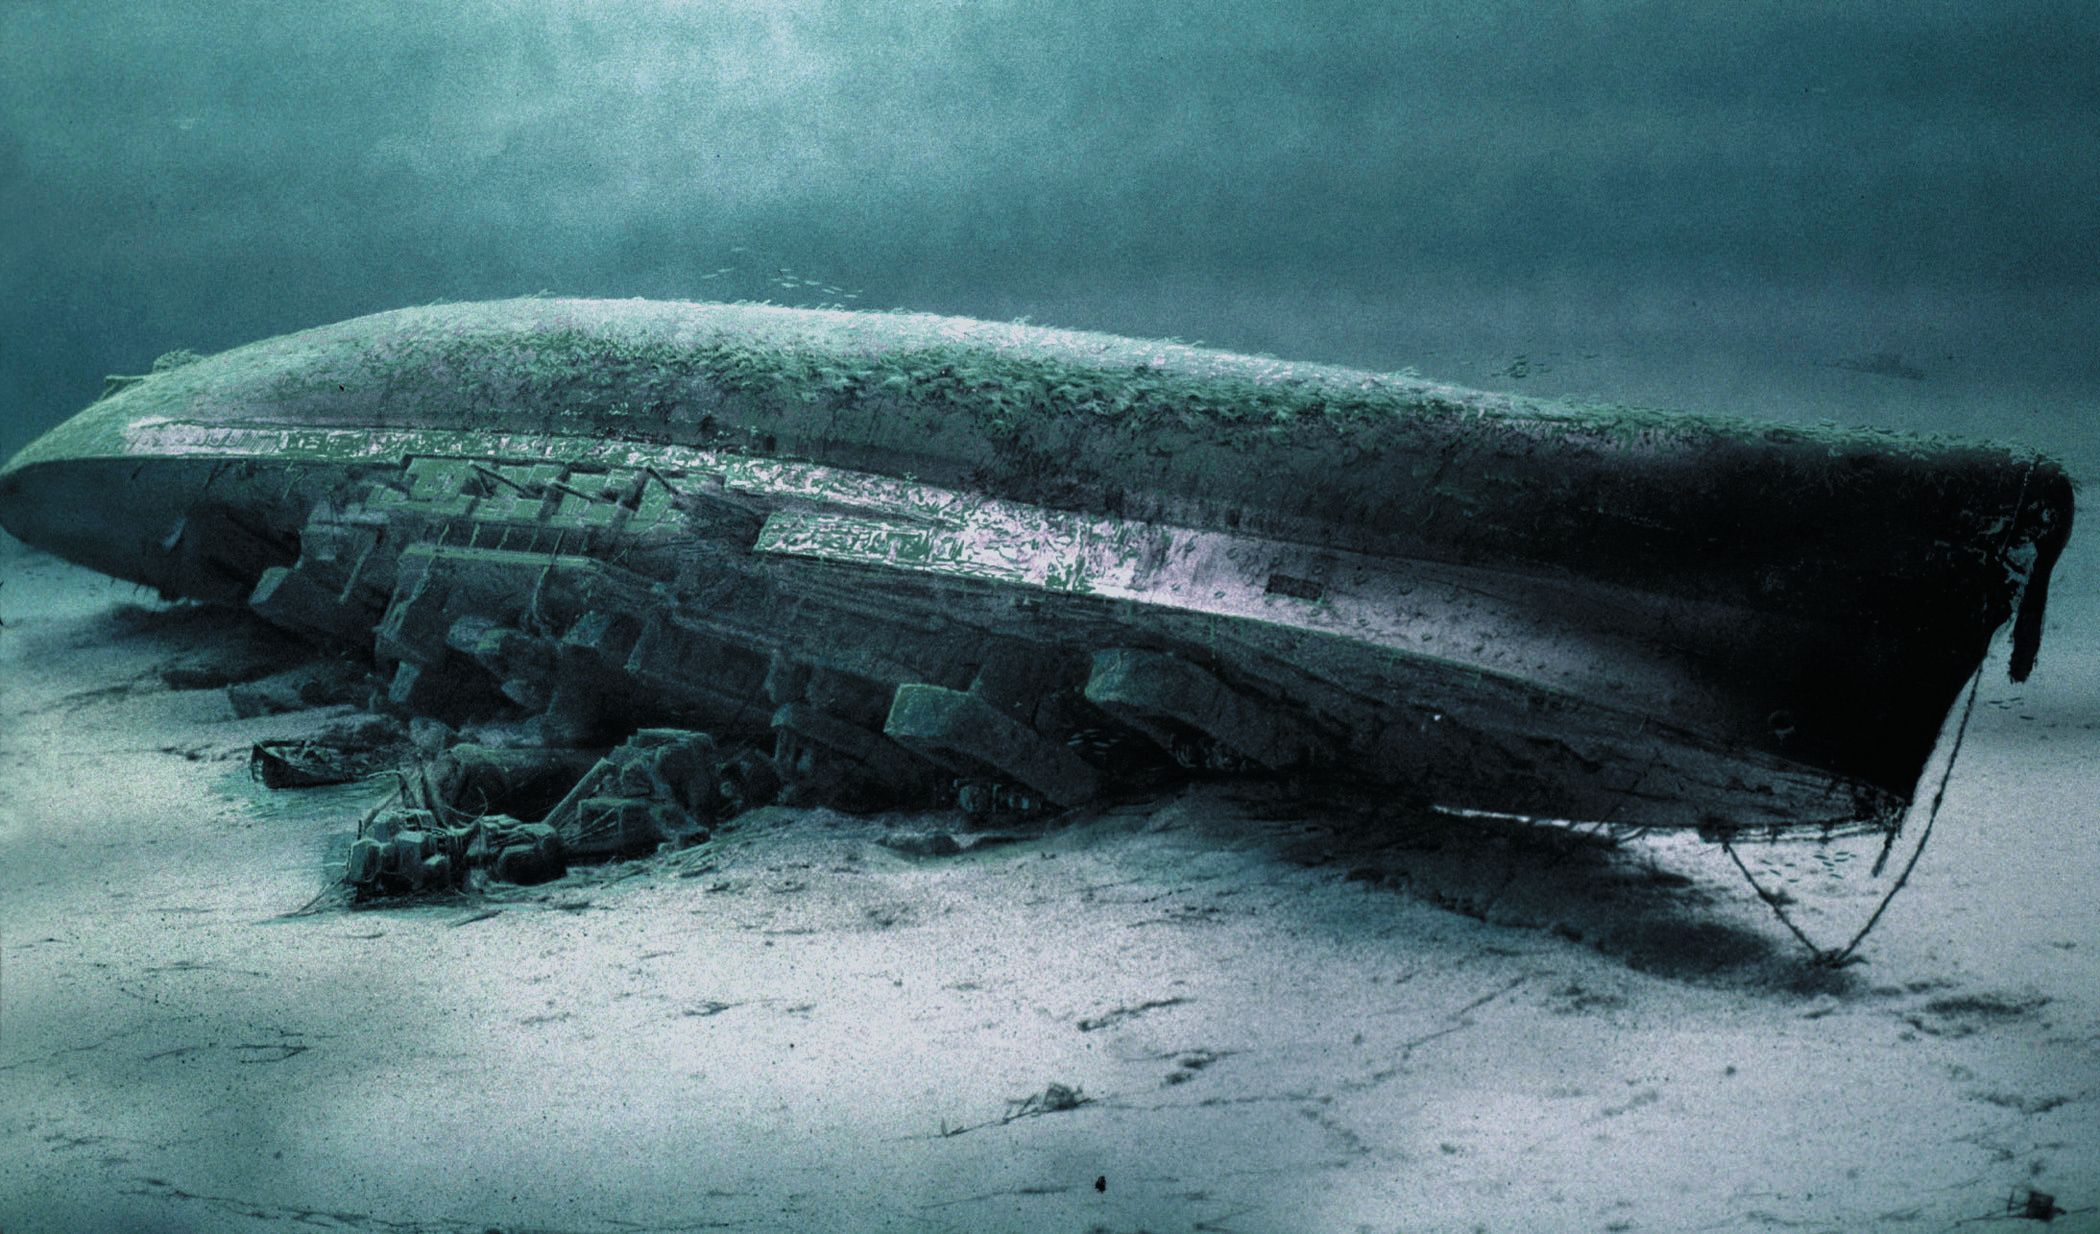 This computer rendering, based on underwater photographs, shows the sunken hulk of the battleship HMS Royal Oak lying on its starboard side 60 feet beneath the surface of Scapa Flow. A war grave for 833 sailors of the Royal Navy, the resting place of the vessel is the site of an annual ceremony in memory of those who died. 